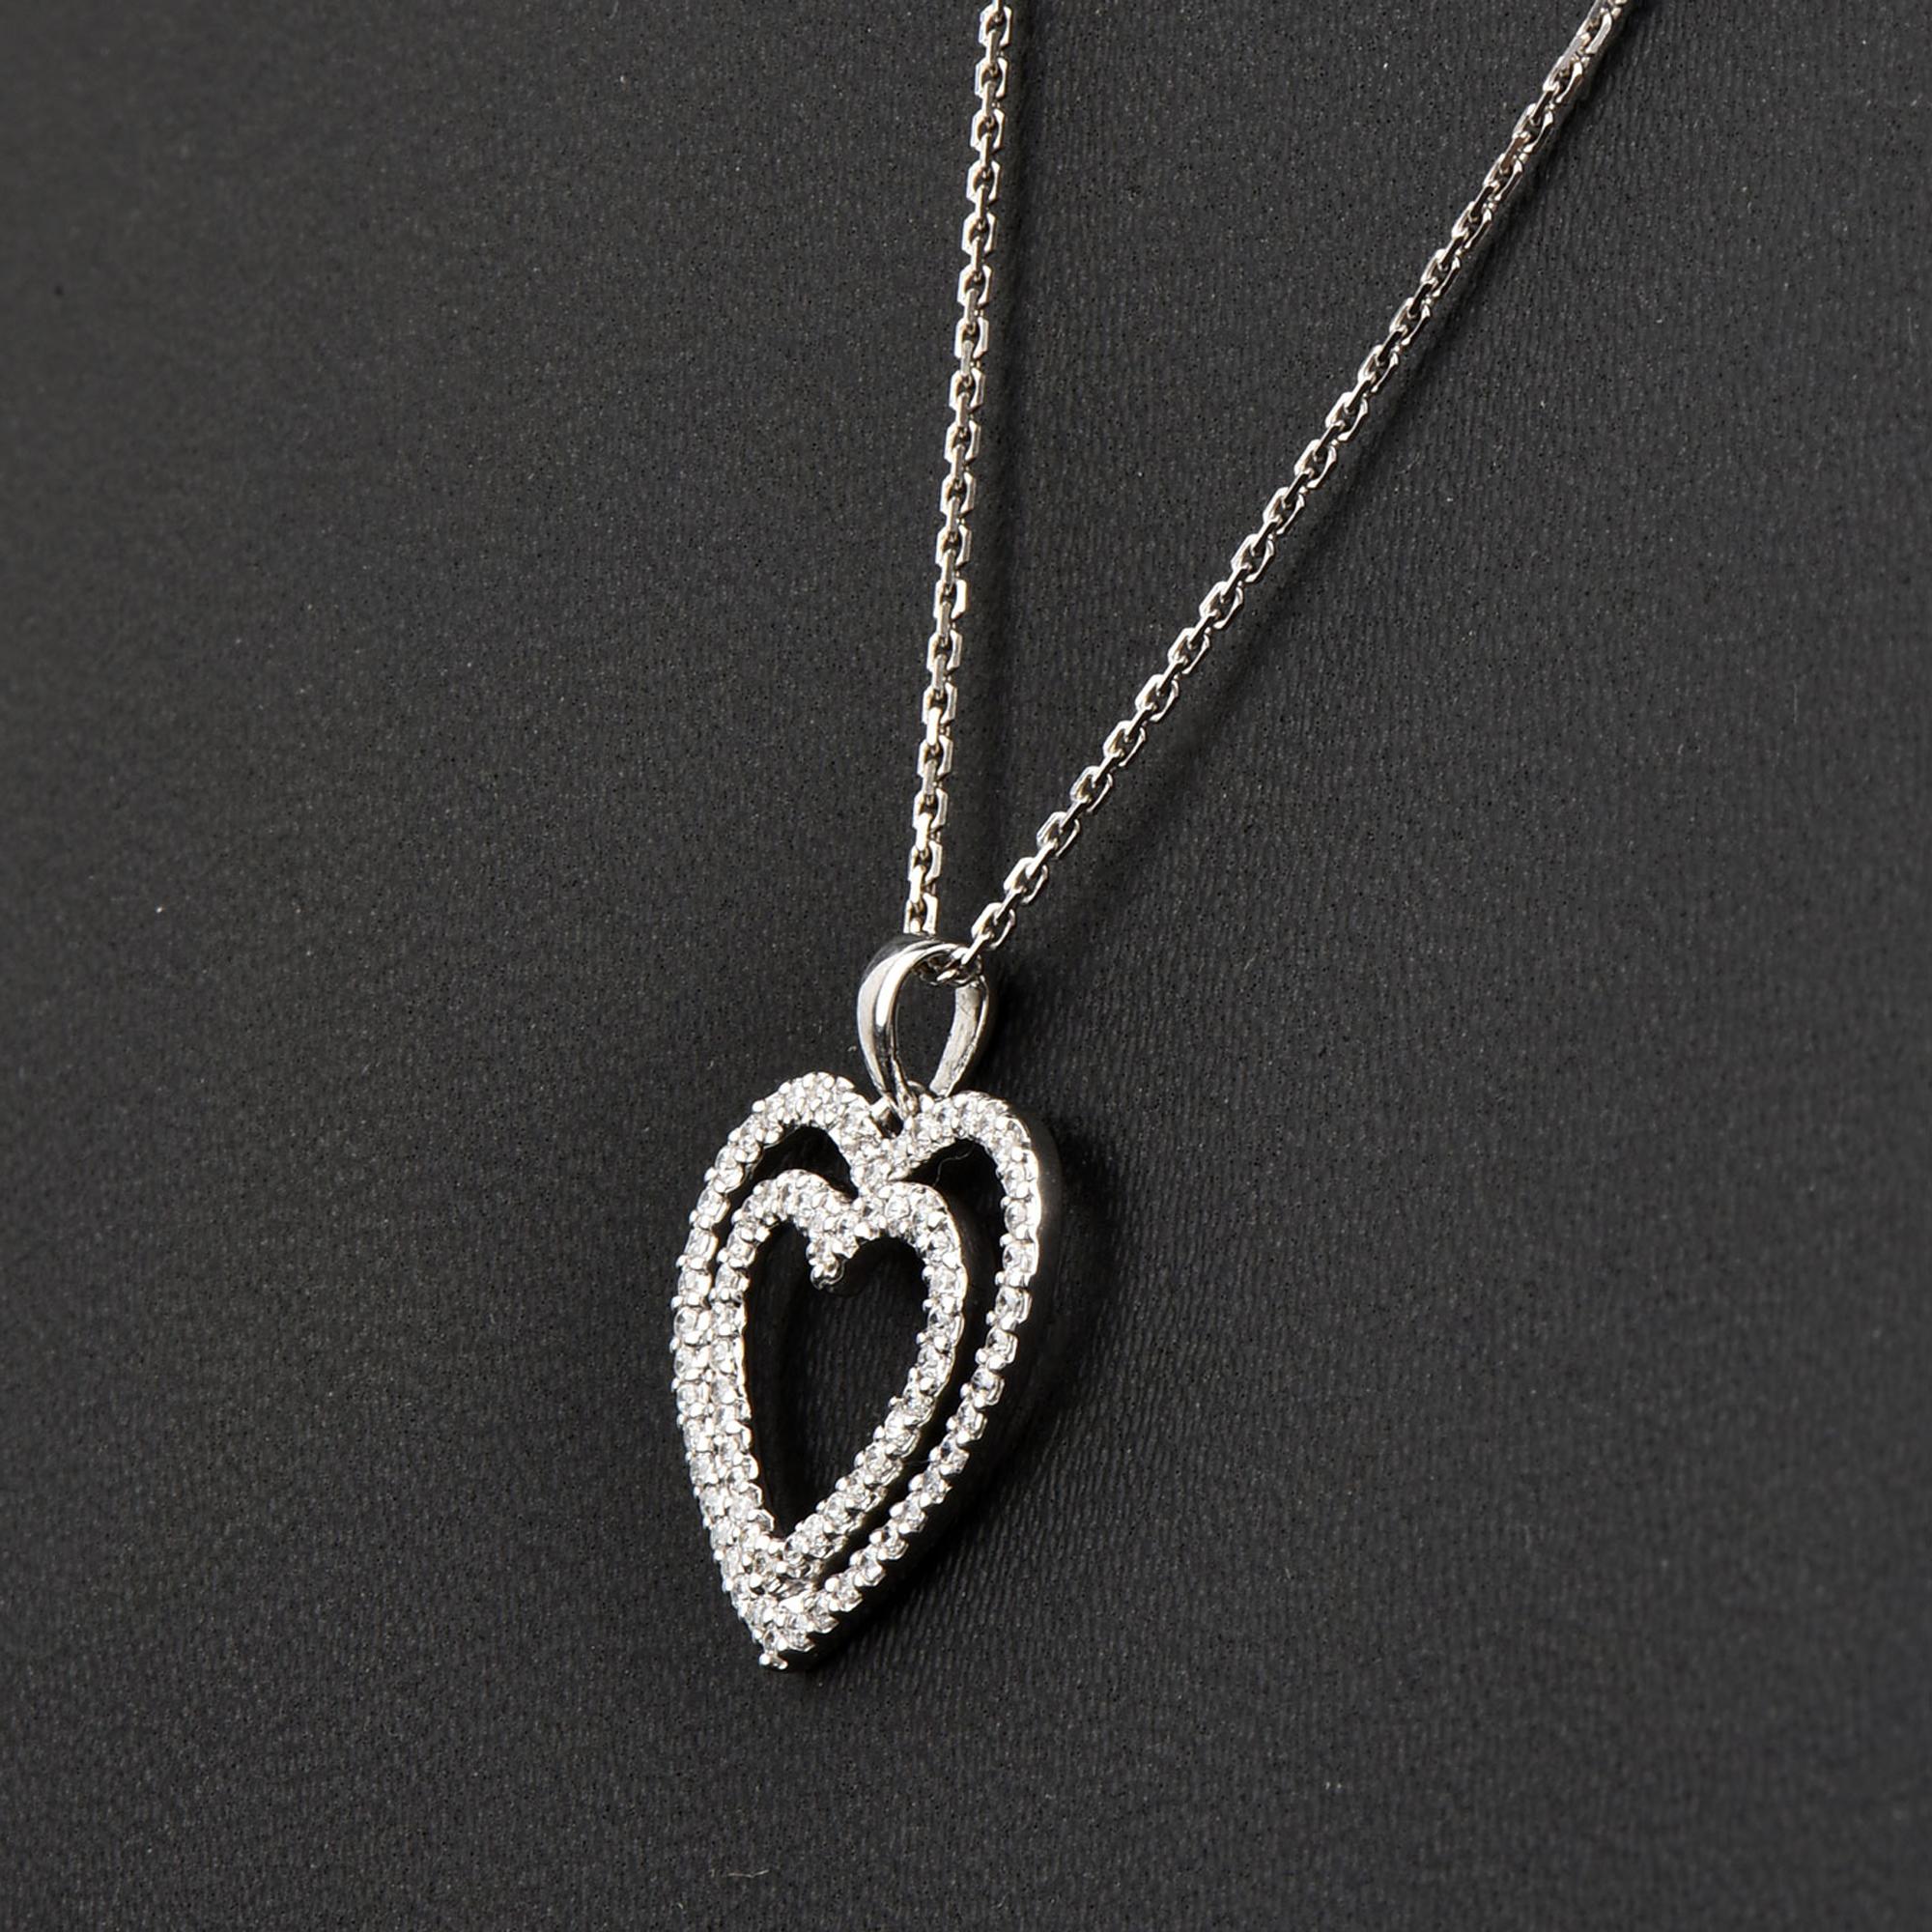 Bring charm to your look with this diamond double heart pendant. The pendant is crafted from 14-karat White gold and features Round Brilliant 77 white diamonds set in prong setting H-I color I2 clarity and a high polish finish complete the Brilliant